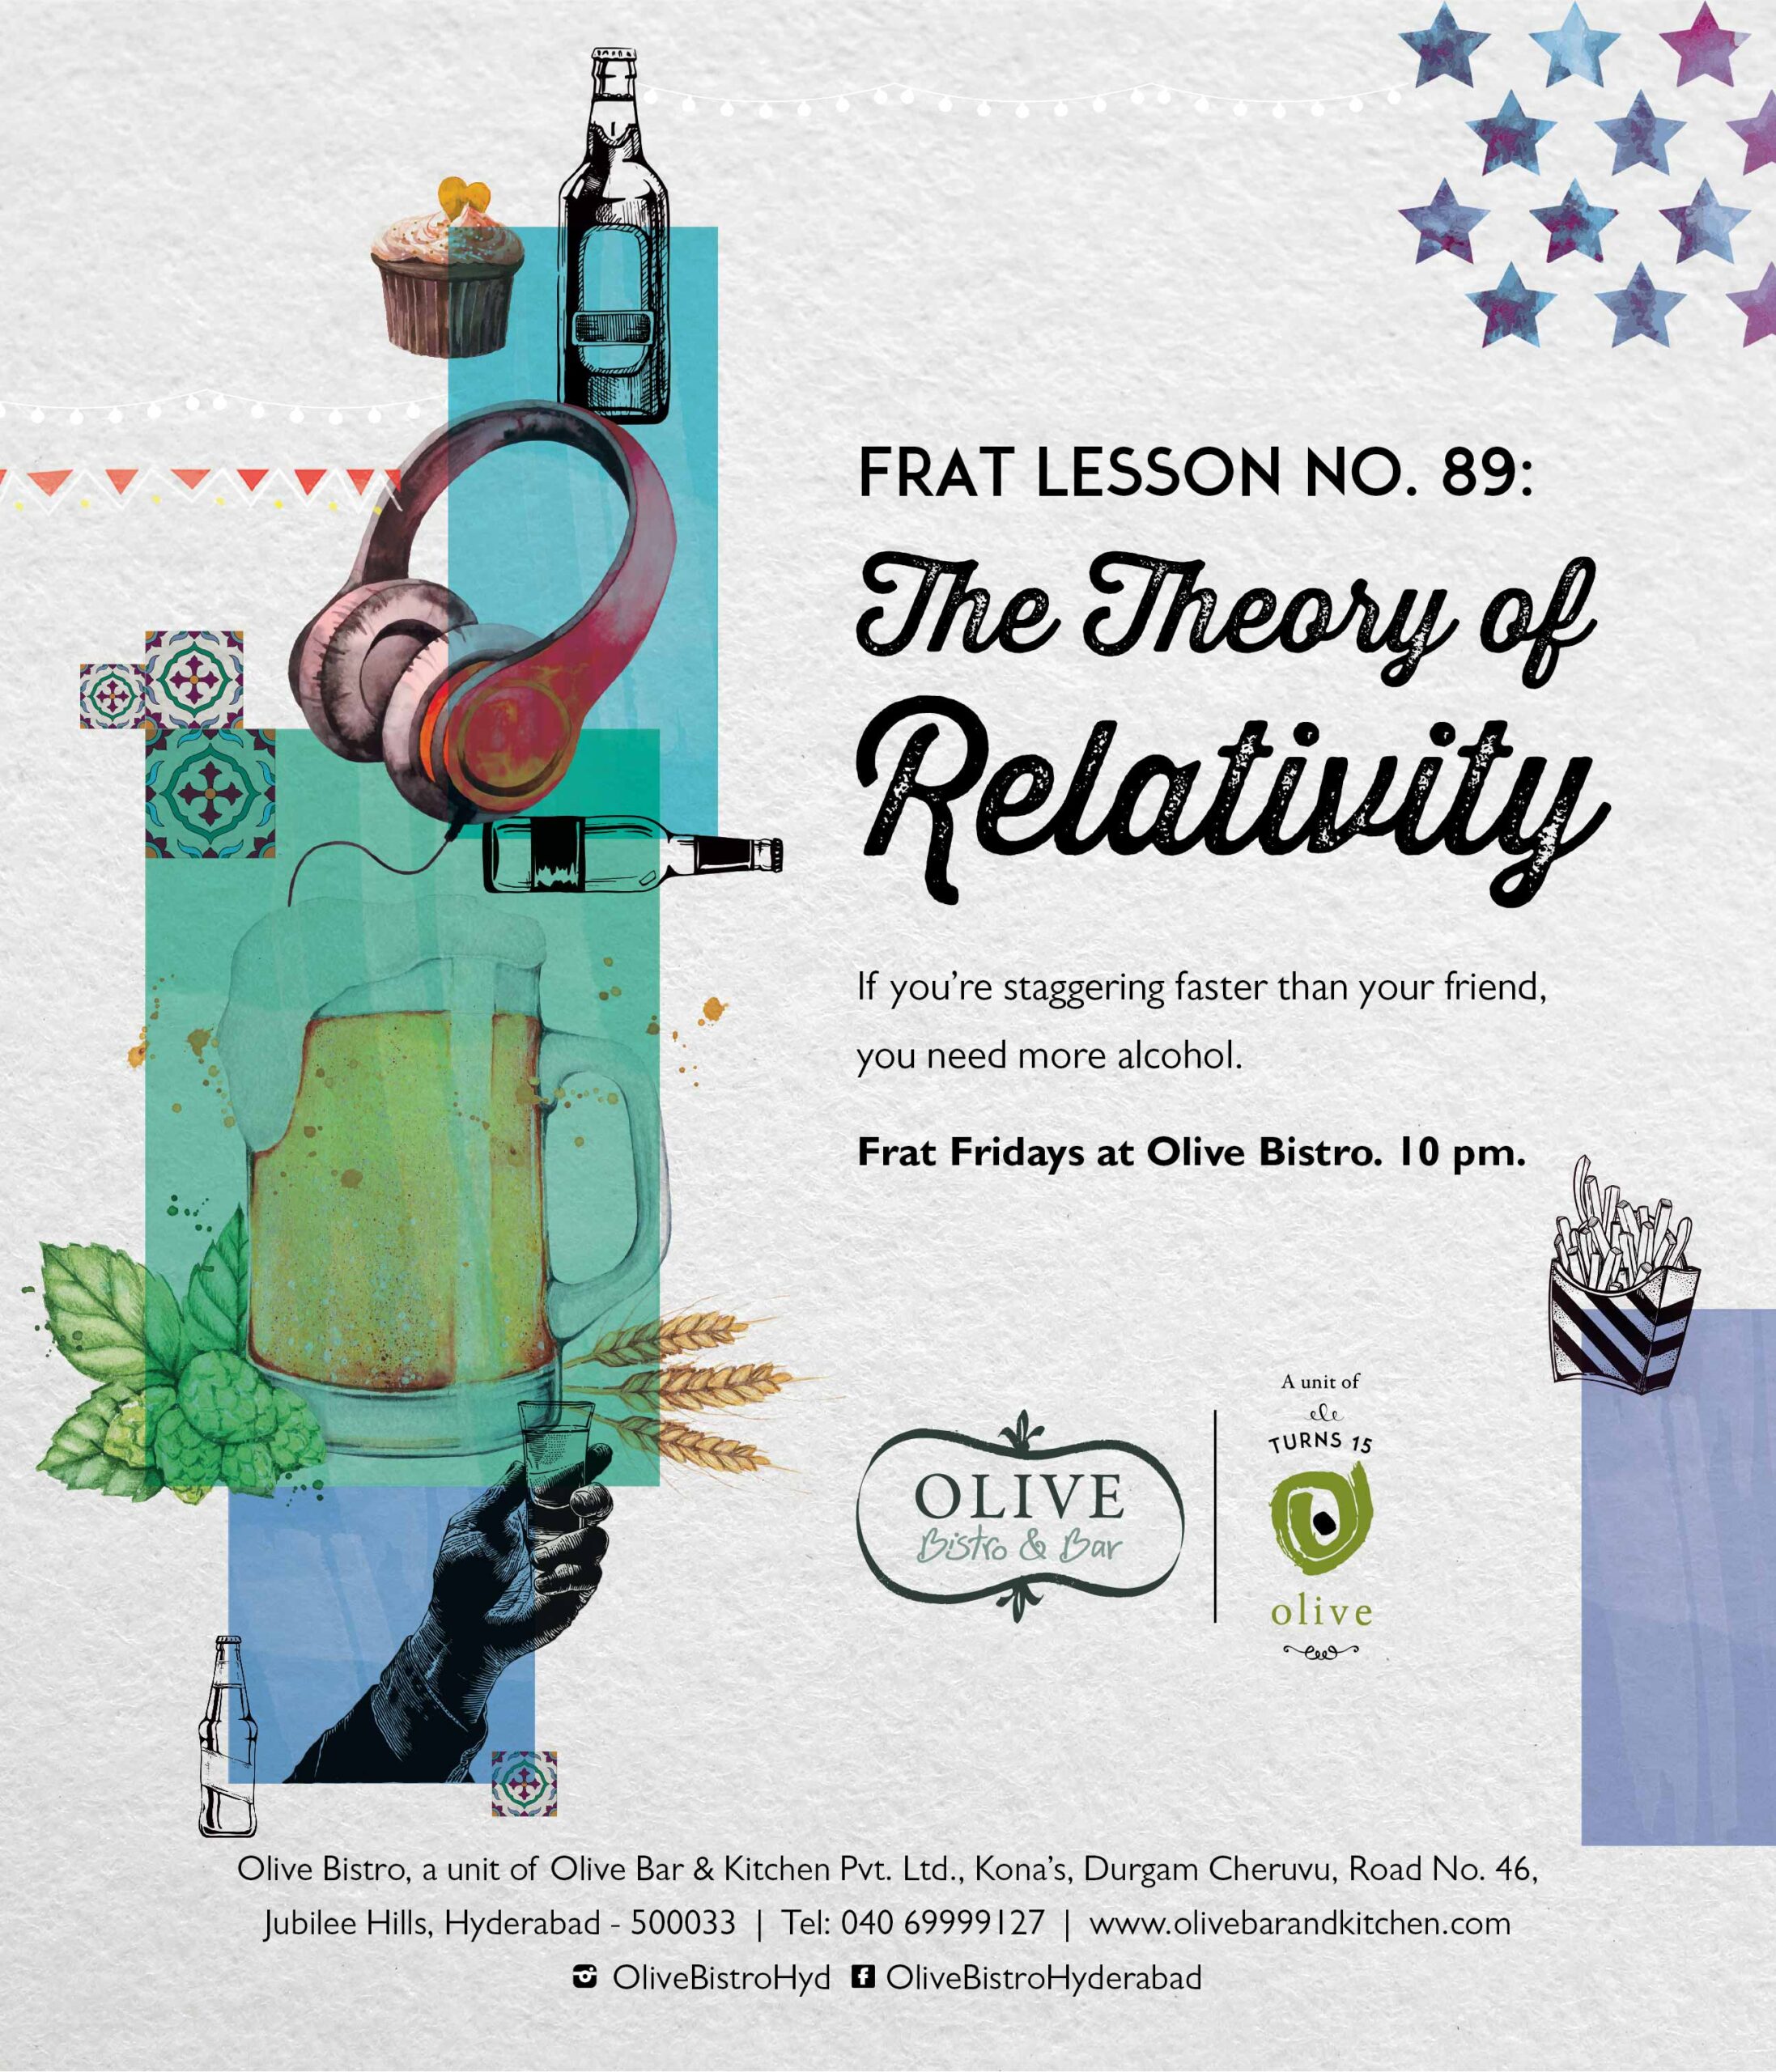 This poster for Frat Fridays at Olive Bistro, Hyderabad is a dummies guide to the celebrated theory of relativity, over copious amounts of alcohol.